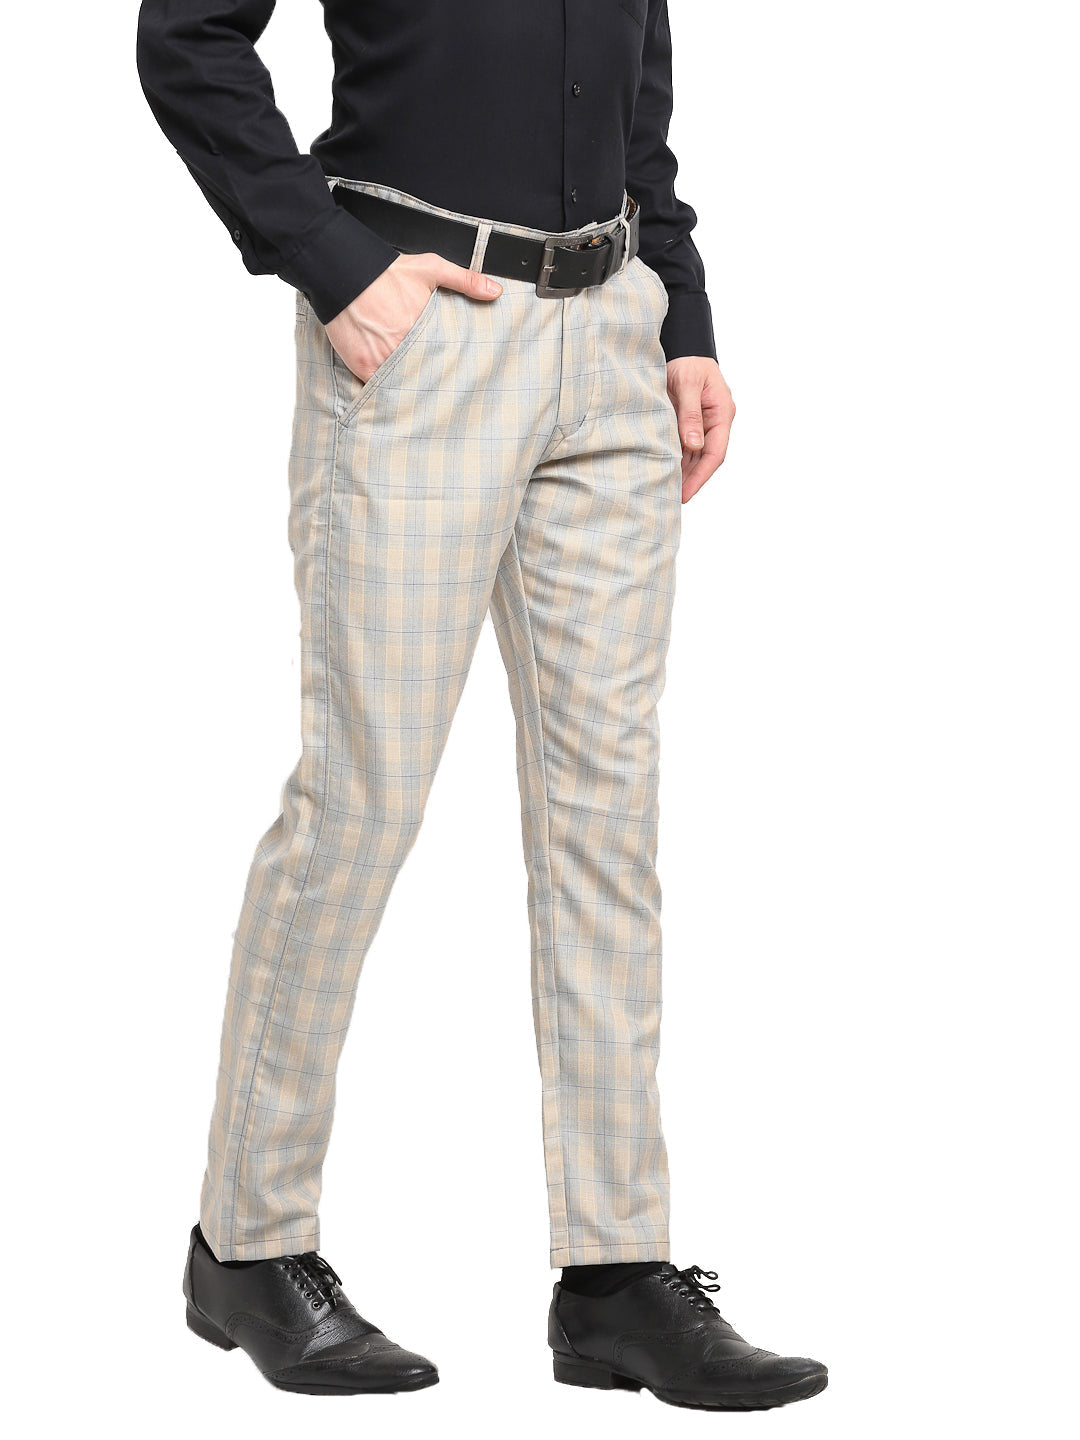 Formal Pant Blue Check in Bangalore at best price by Pure International -  Justdial